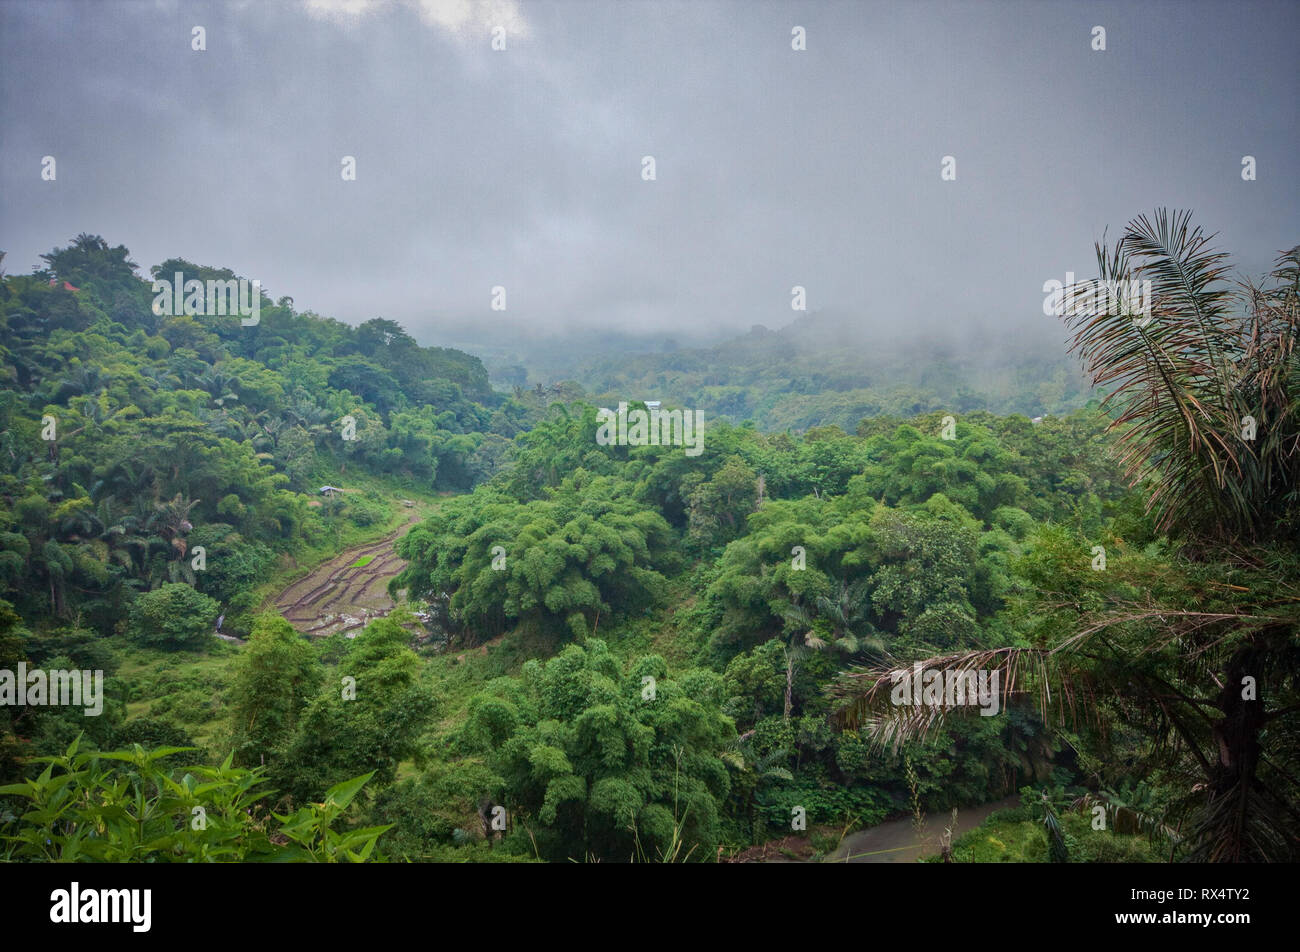 A tiny village called Air Panas Liasembe on a misty clody day in the mountains on Flores Island in Indonesia Stock Photo